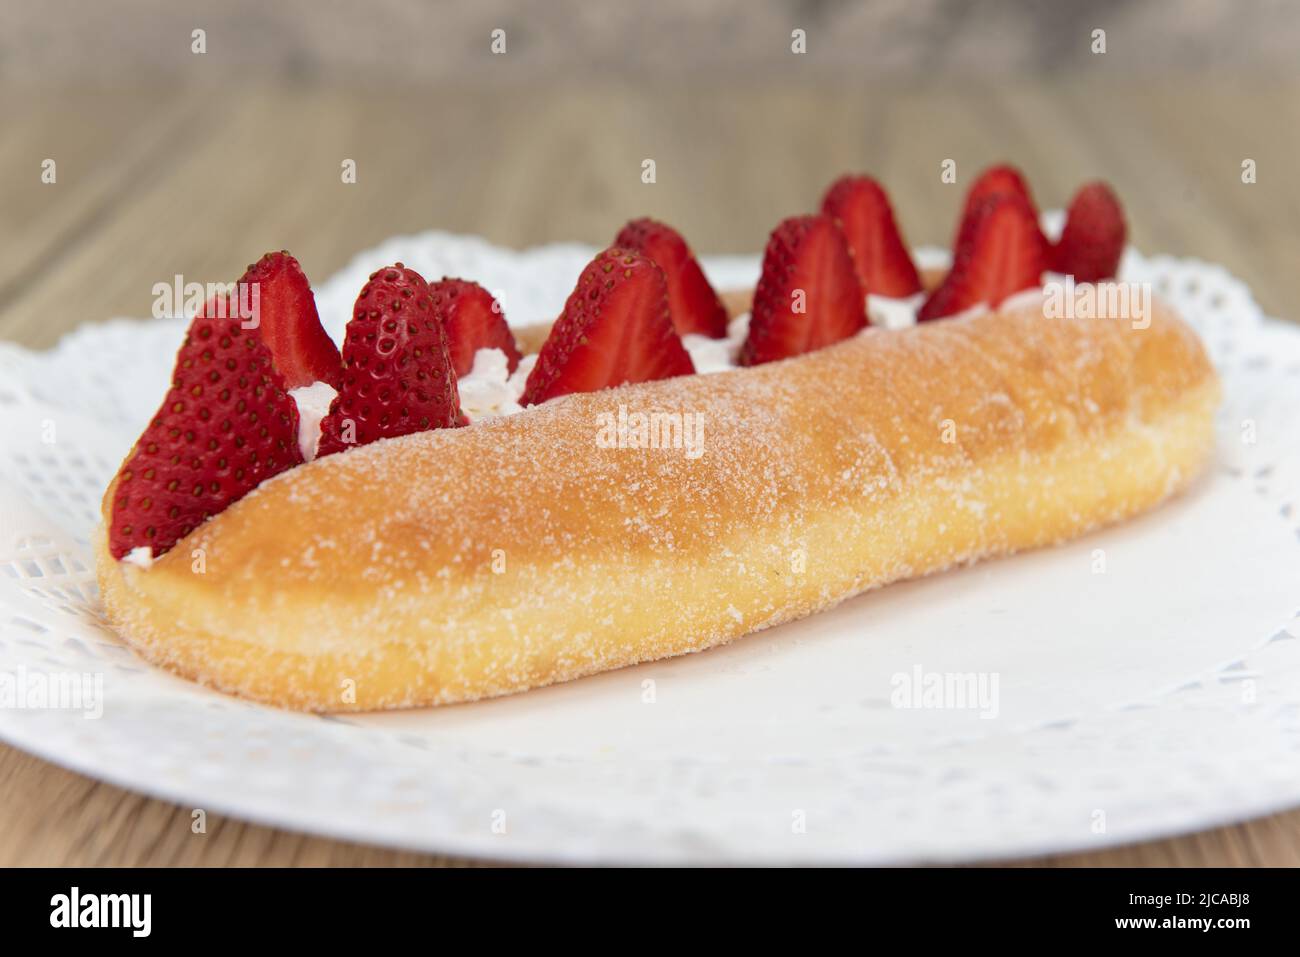 Tempting fresh from the oven fresh strawberry suguar donut from the bakery served on a plate. Stock Photo